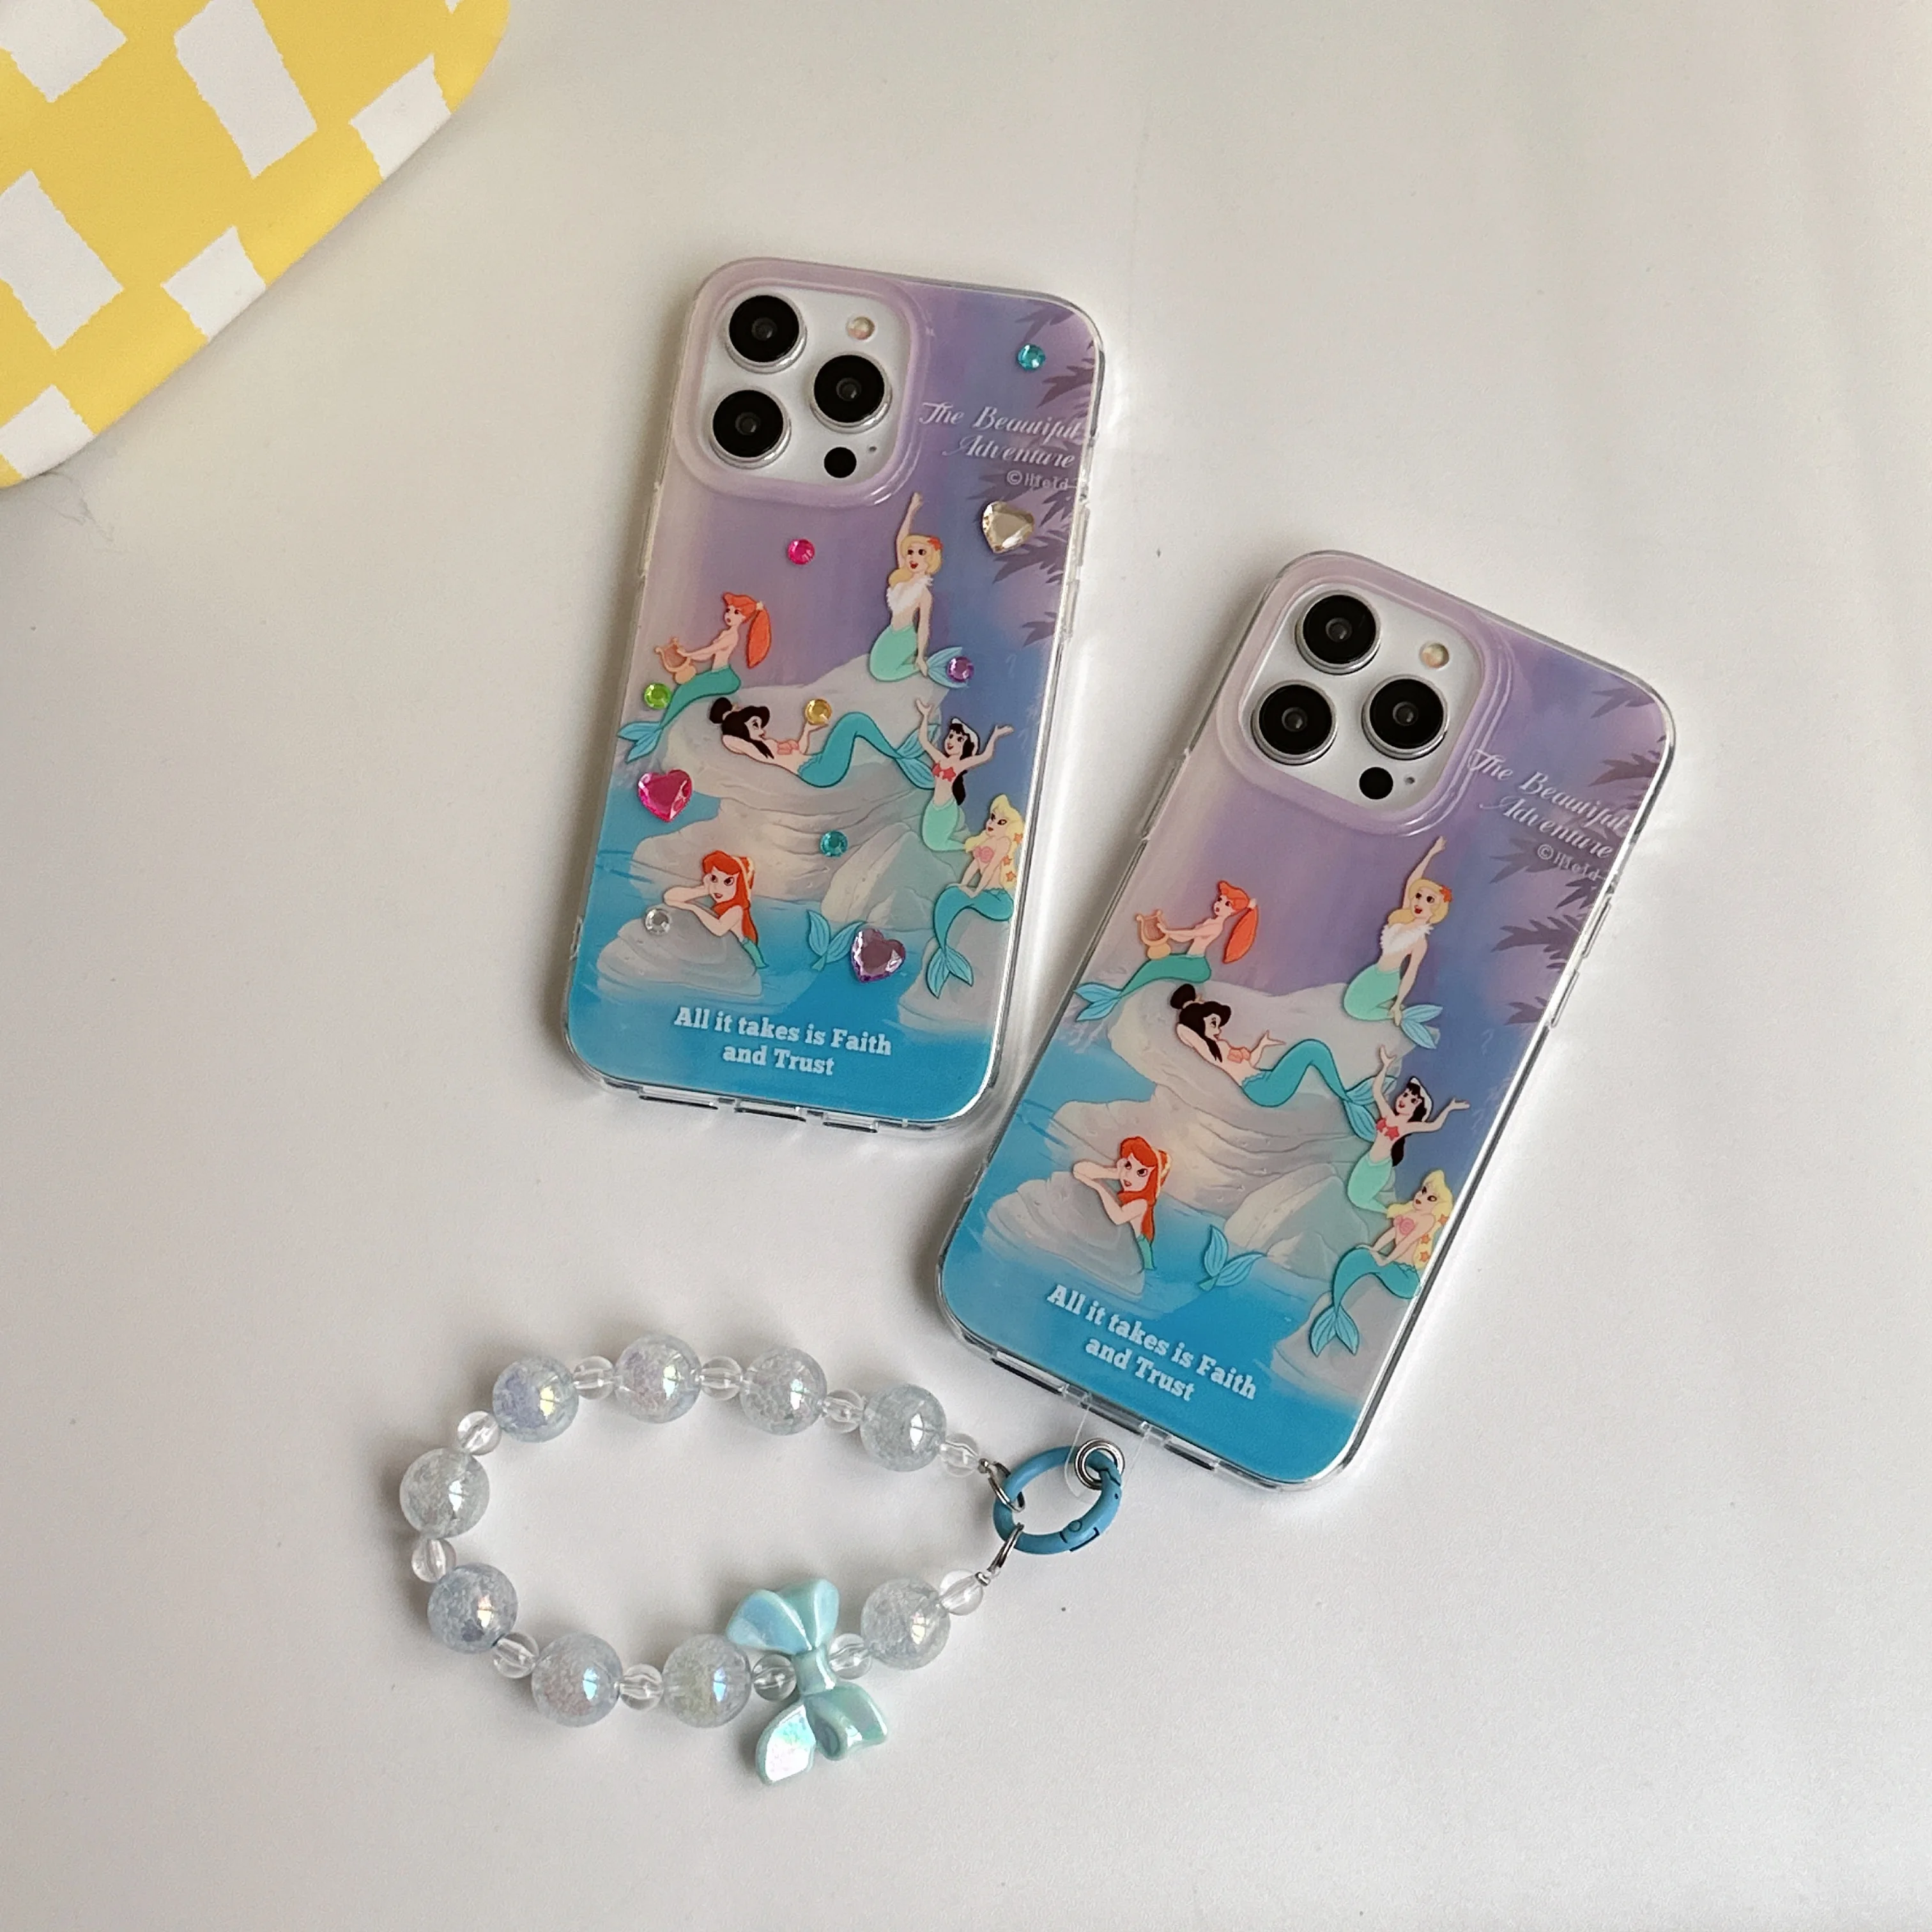 Disney Parks Ariel The Little Mermaid iPhone XR & iPhone 11 Case Cover